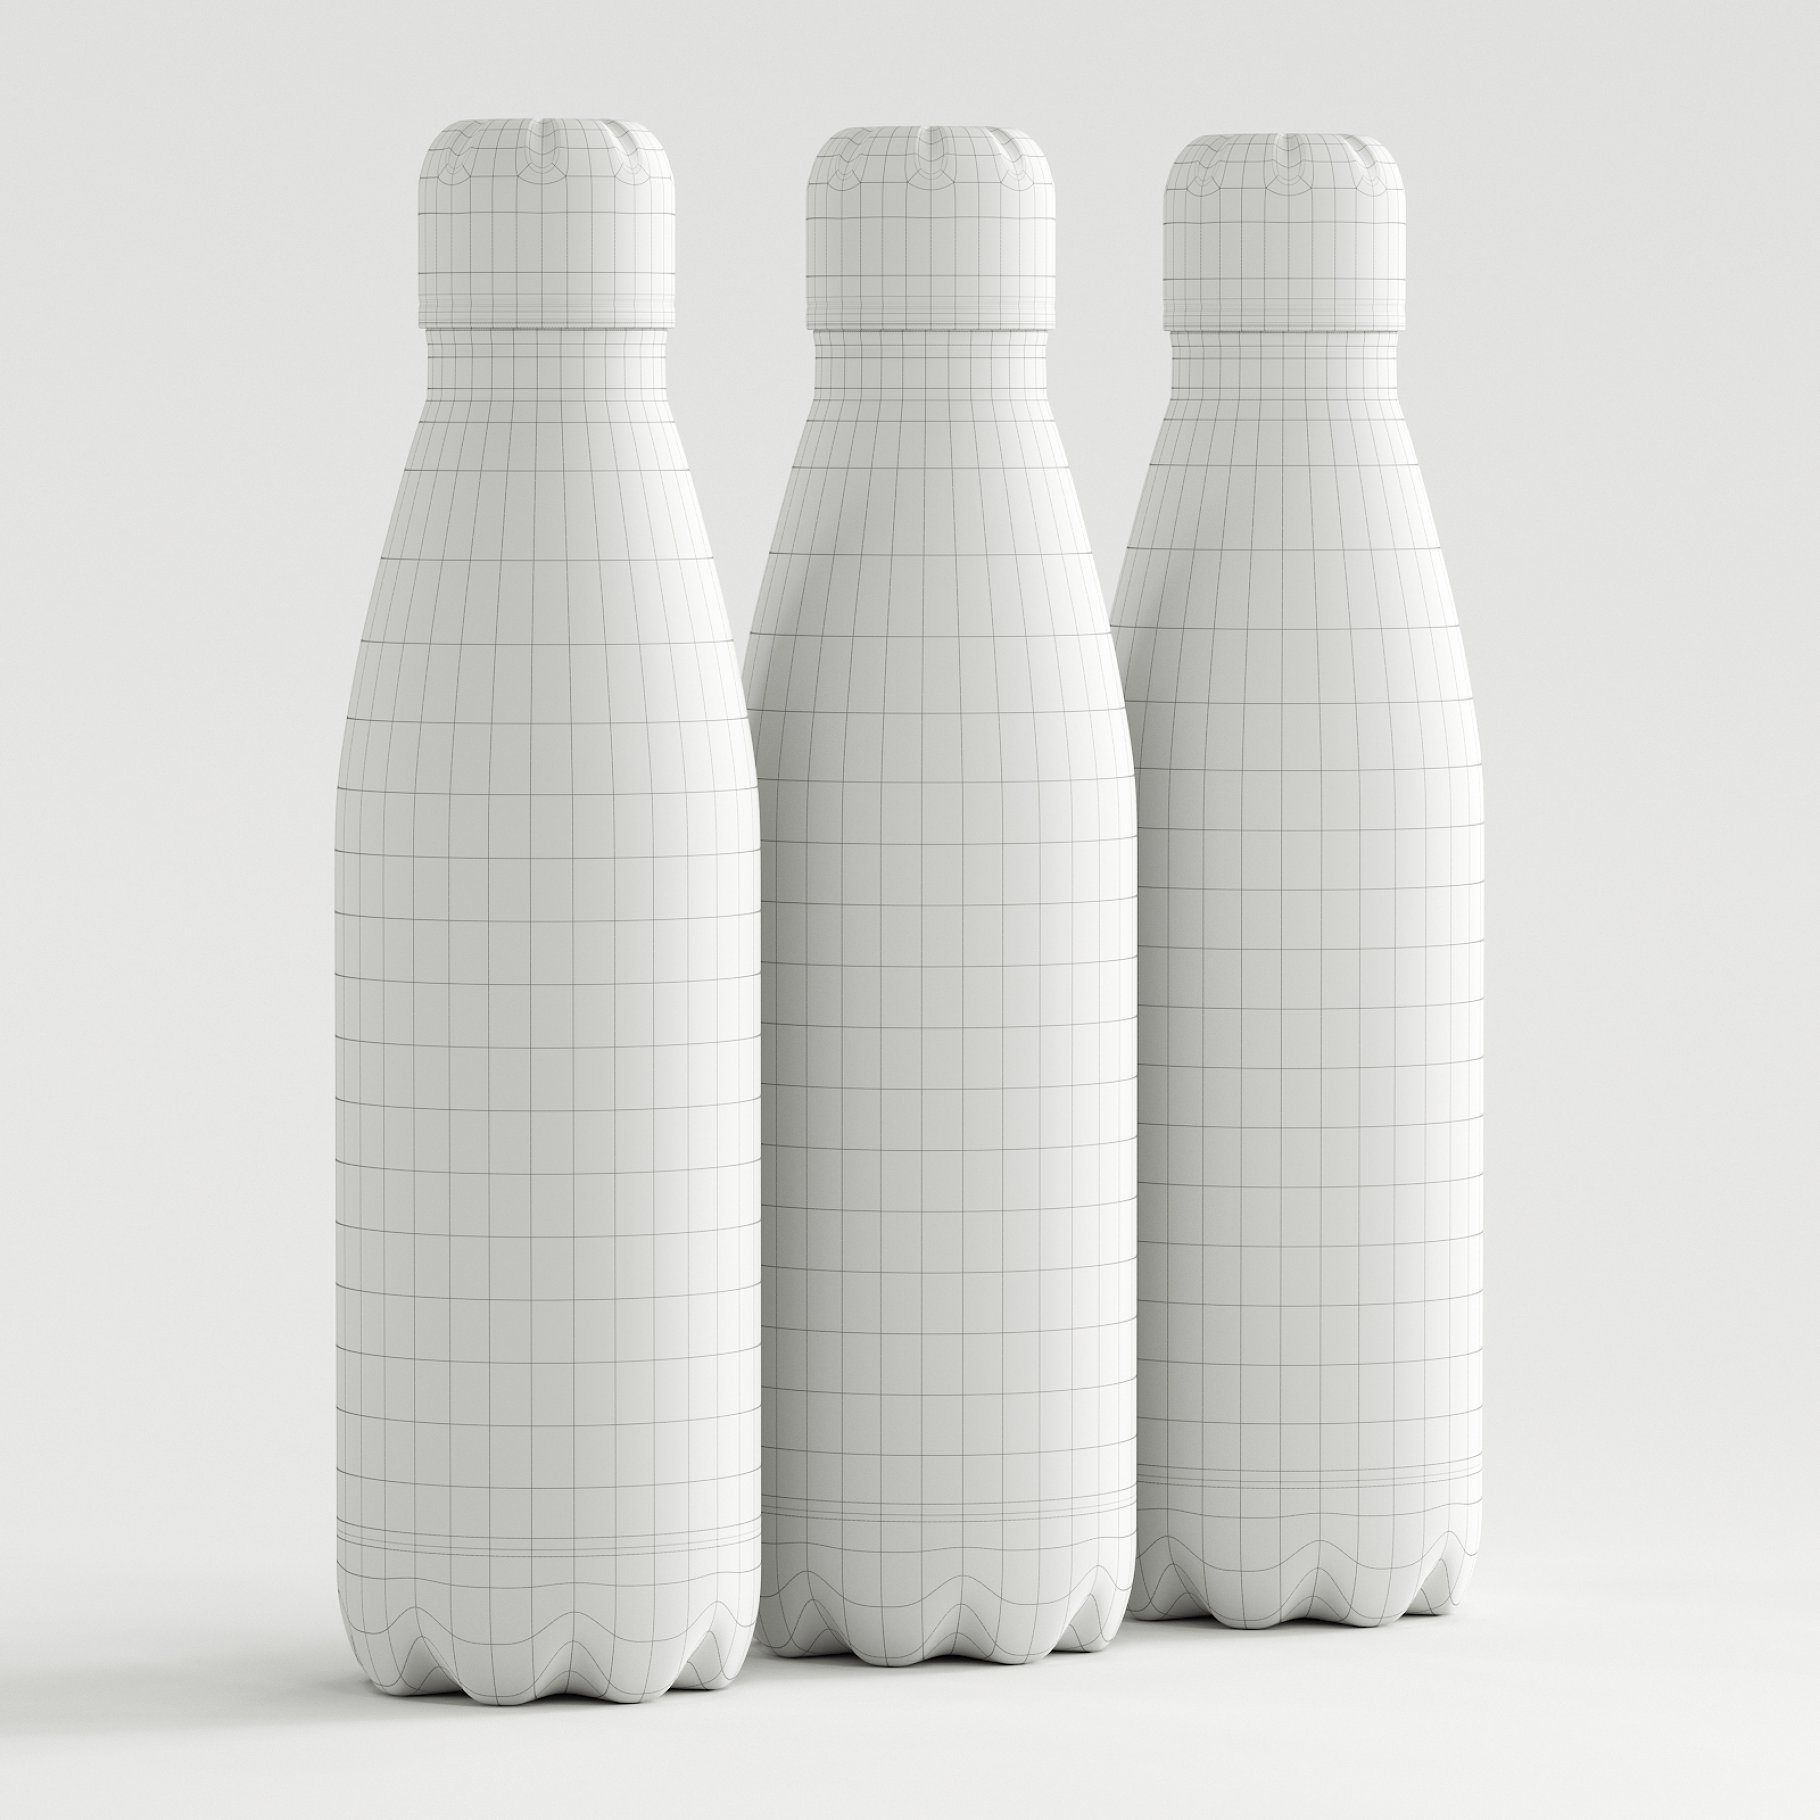 Image of a wonderful 3d model of bottles without textures